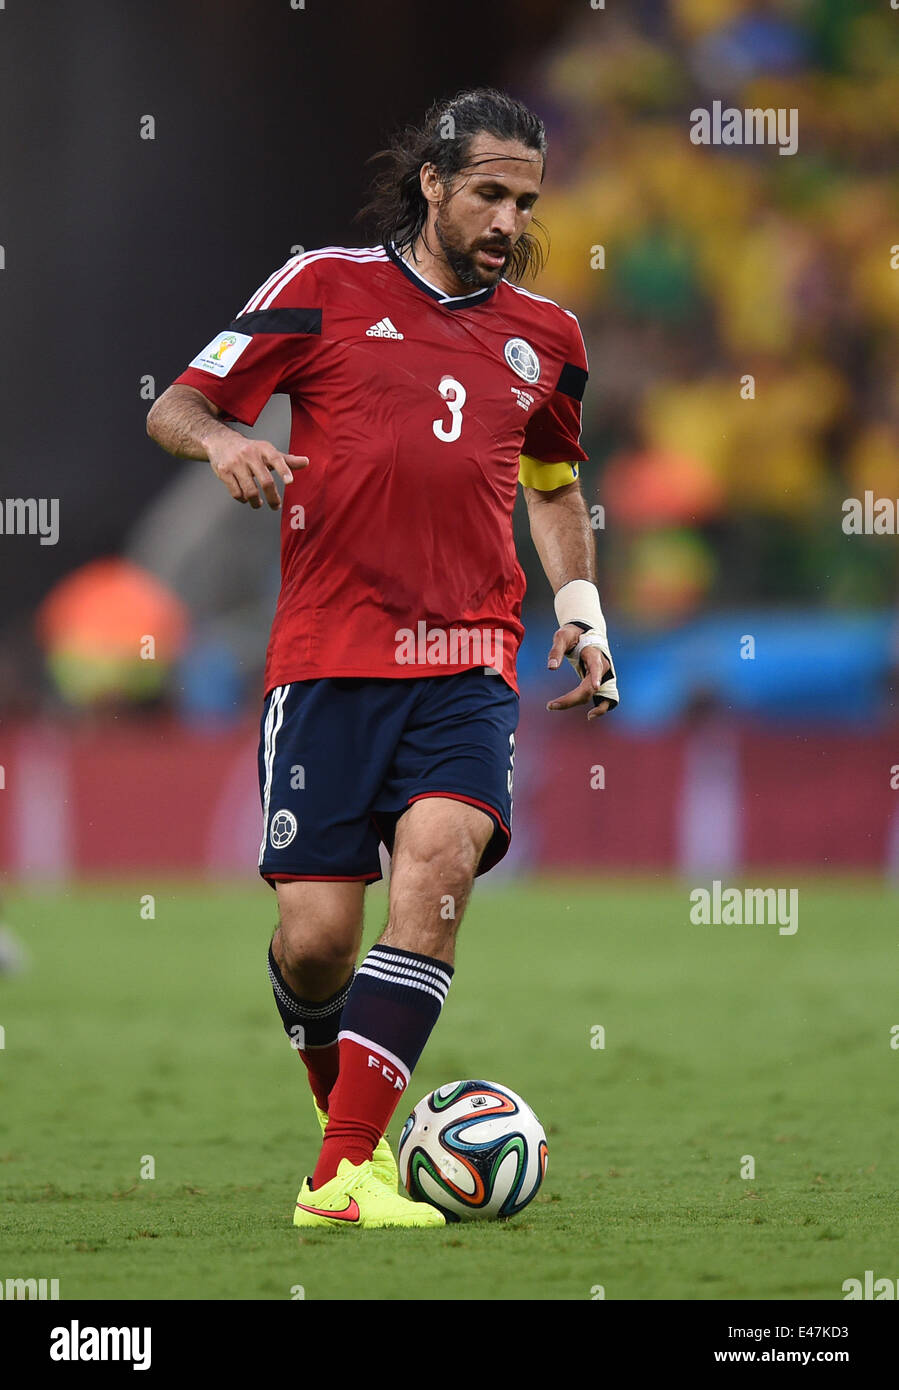 Fortaleza, Brazil. 04th July, 2014. Mario Yepes of Colombia in action during the FIFA World Cup 2014 quarter final match soccer between Brazil and Colombia at the Estadio Castelao in Fortaleza, Brazil, 04 July 2014. Photo: Marius Becker/dpa/Alamy Live News Stock Photo